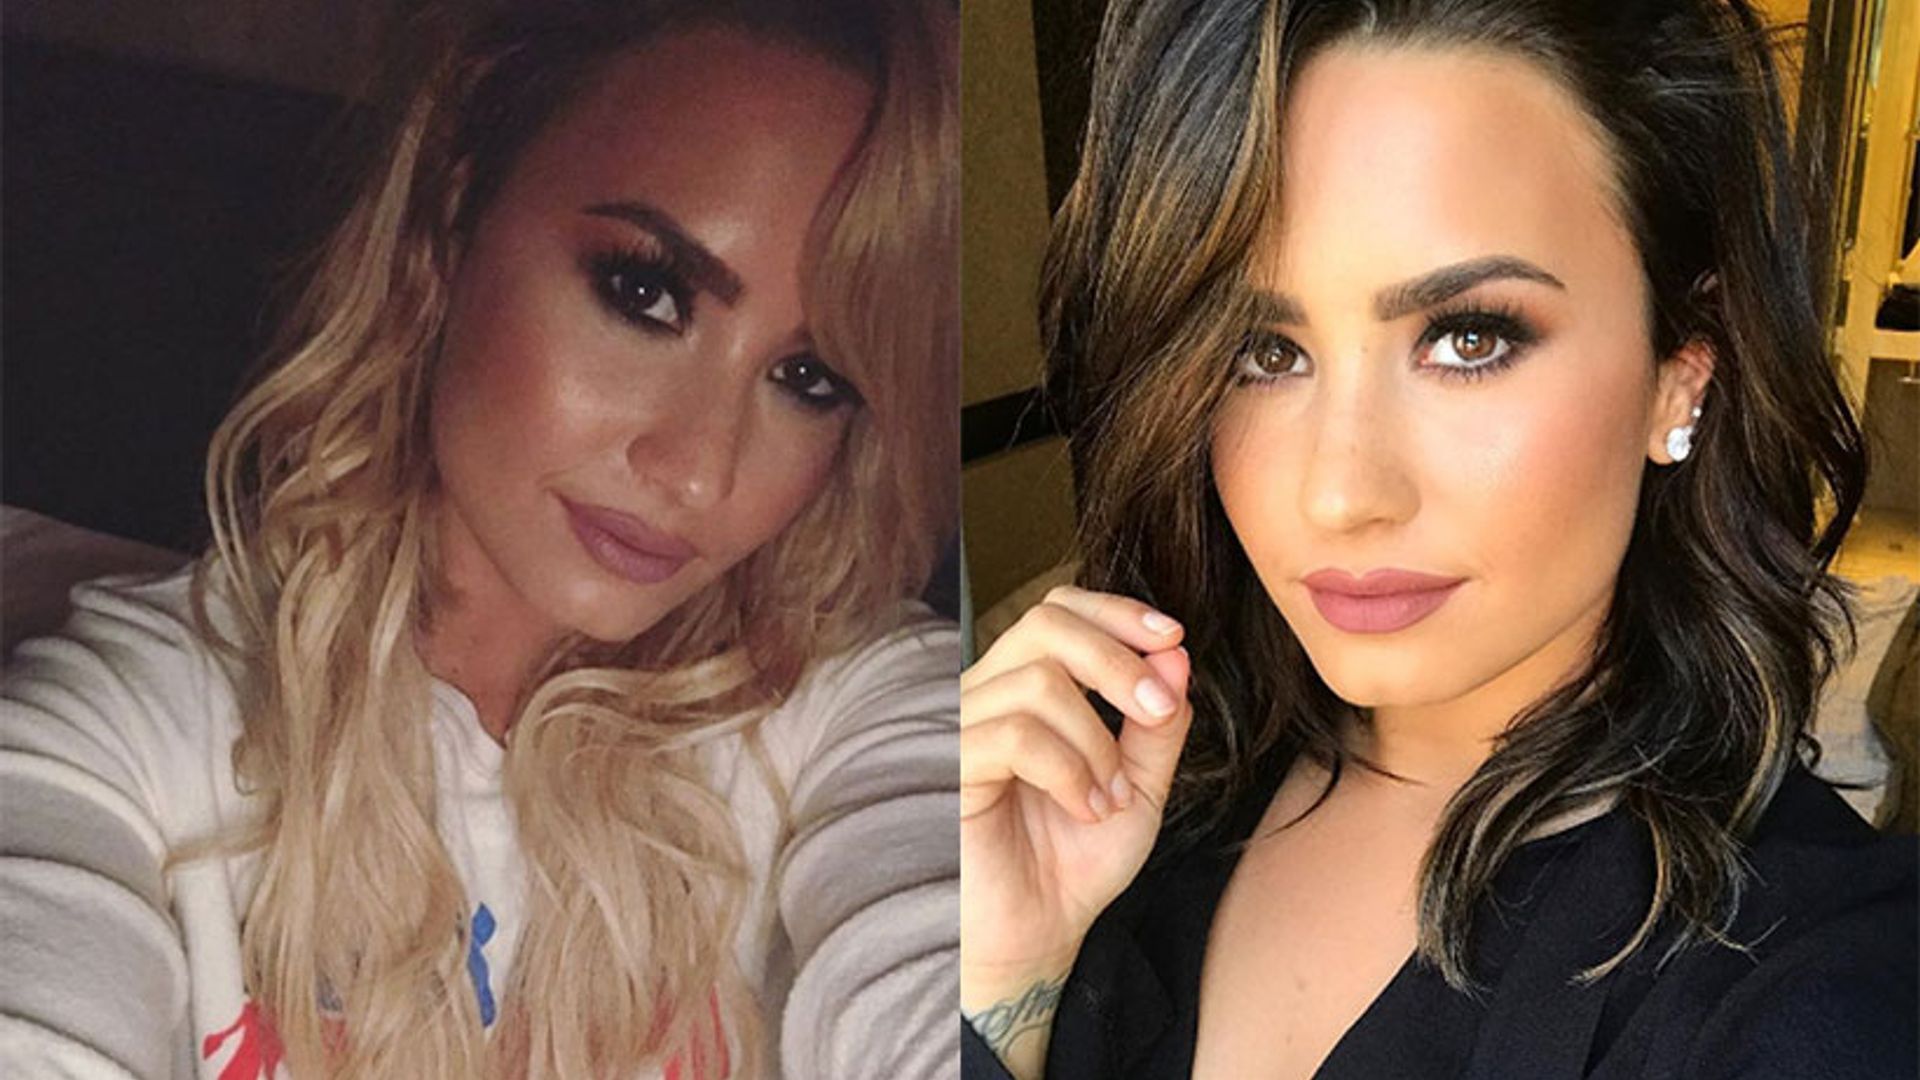 Demi Lovato unveils her new blonde hair inspired by fairytale character